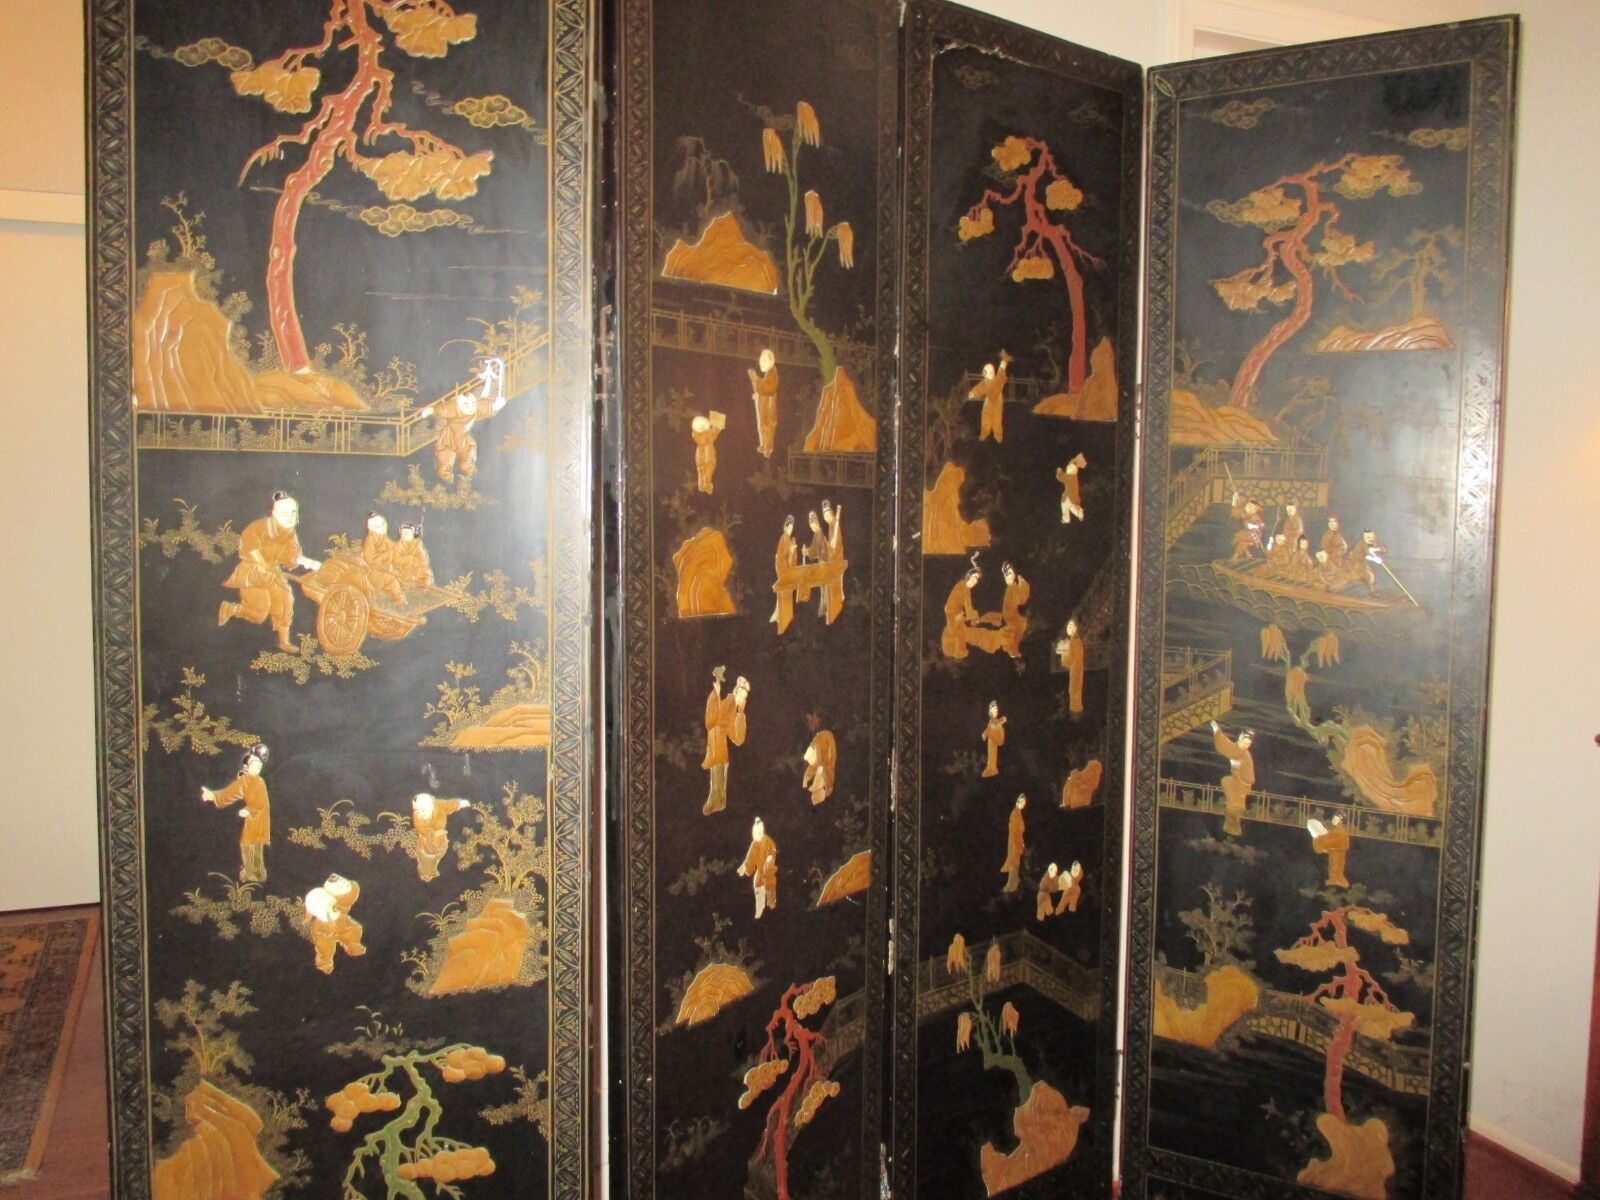 ANTIQUE CHINESE BLACK LACQUER SCREEN Mother of Pearl-EXQUISITE! RARE19th C. Без бренда - фотография #6